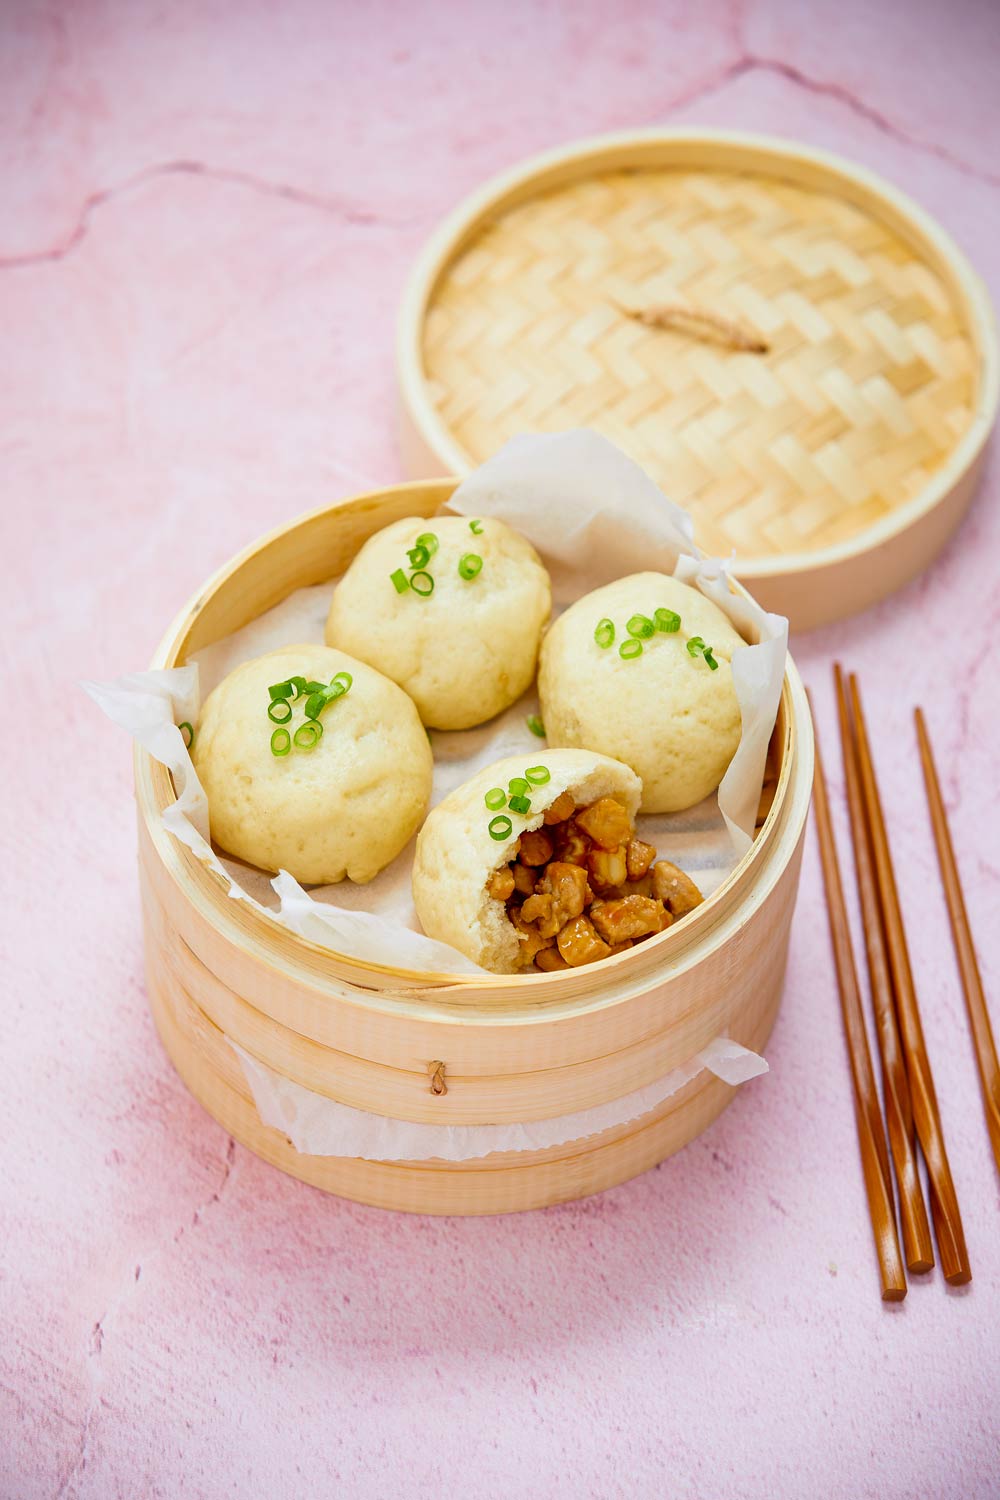 Steamed gluten-free pork buns in bamboo steamer on pink board with chopsticks to the side.